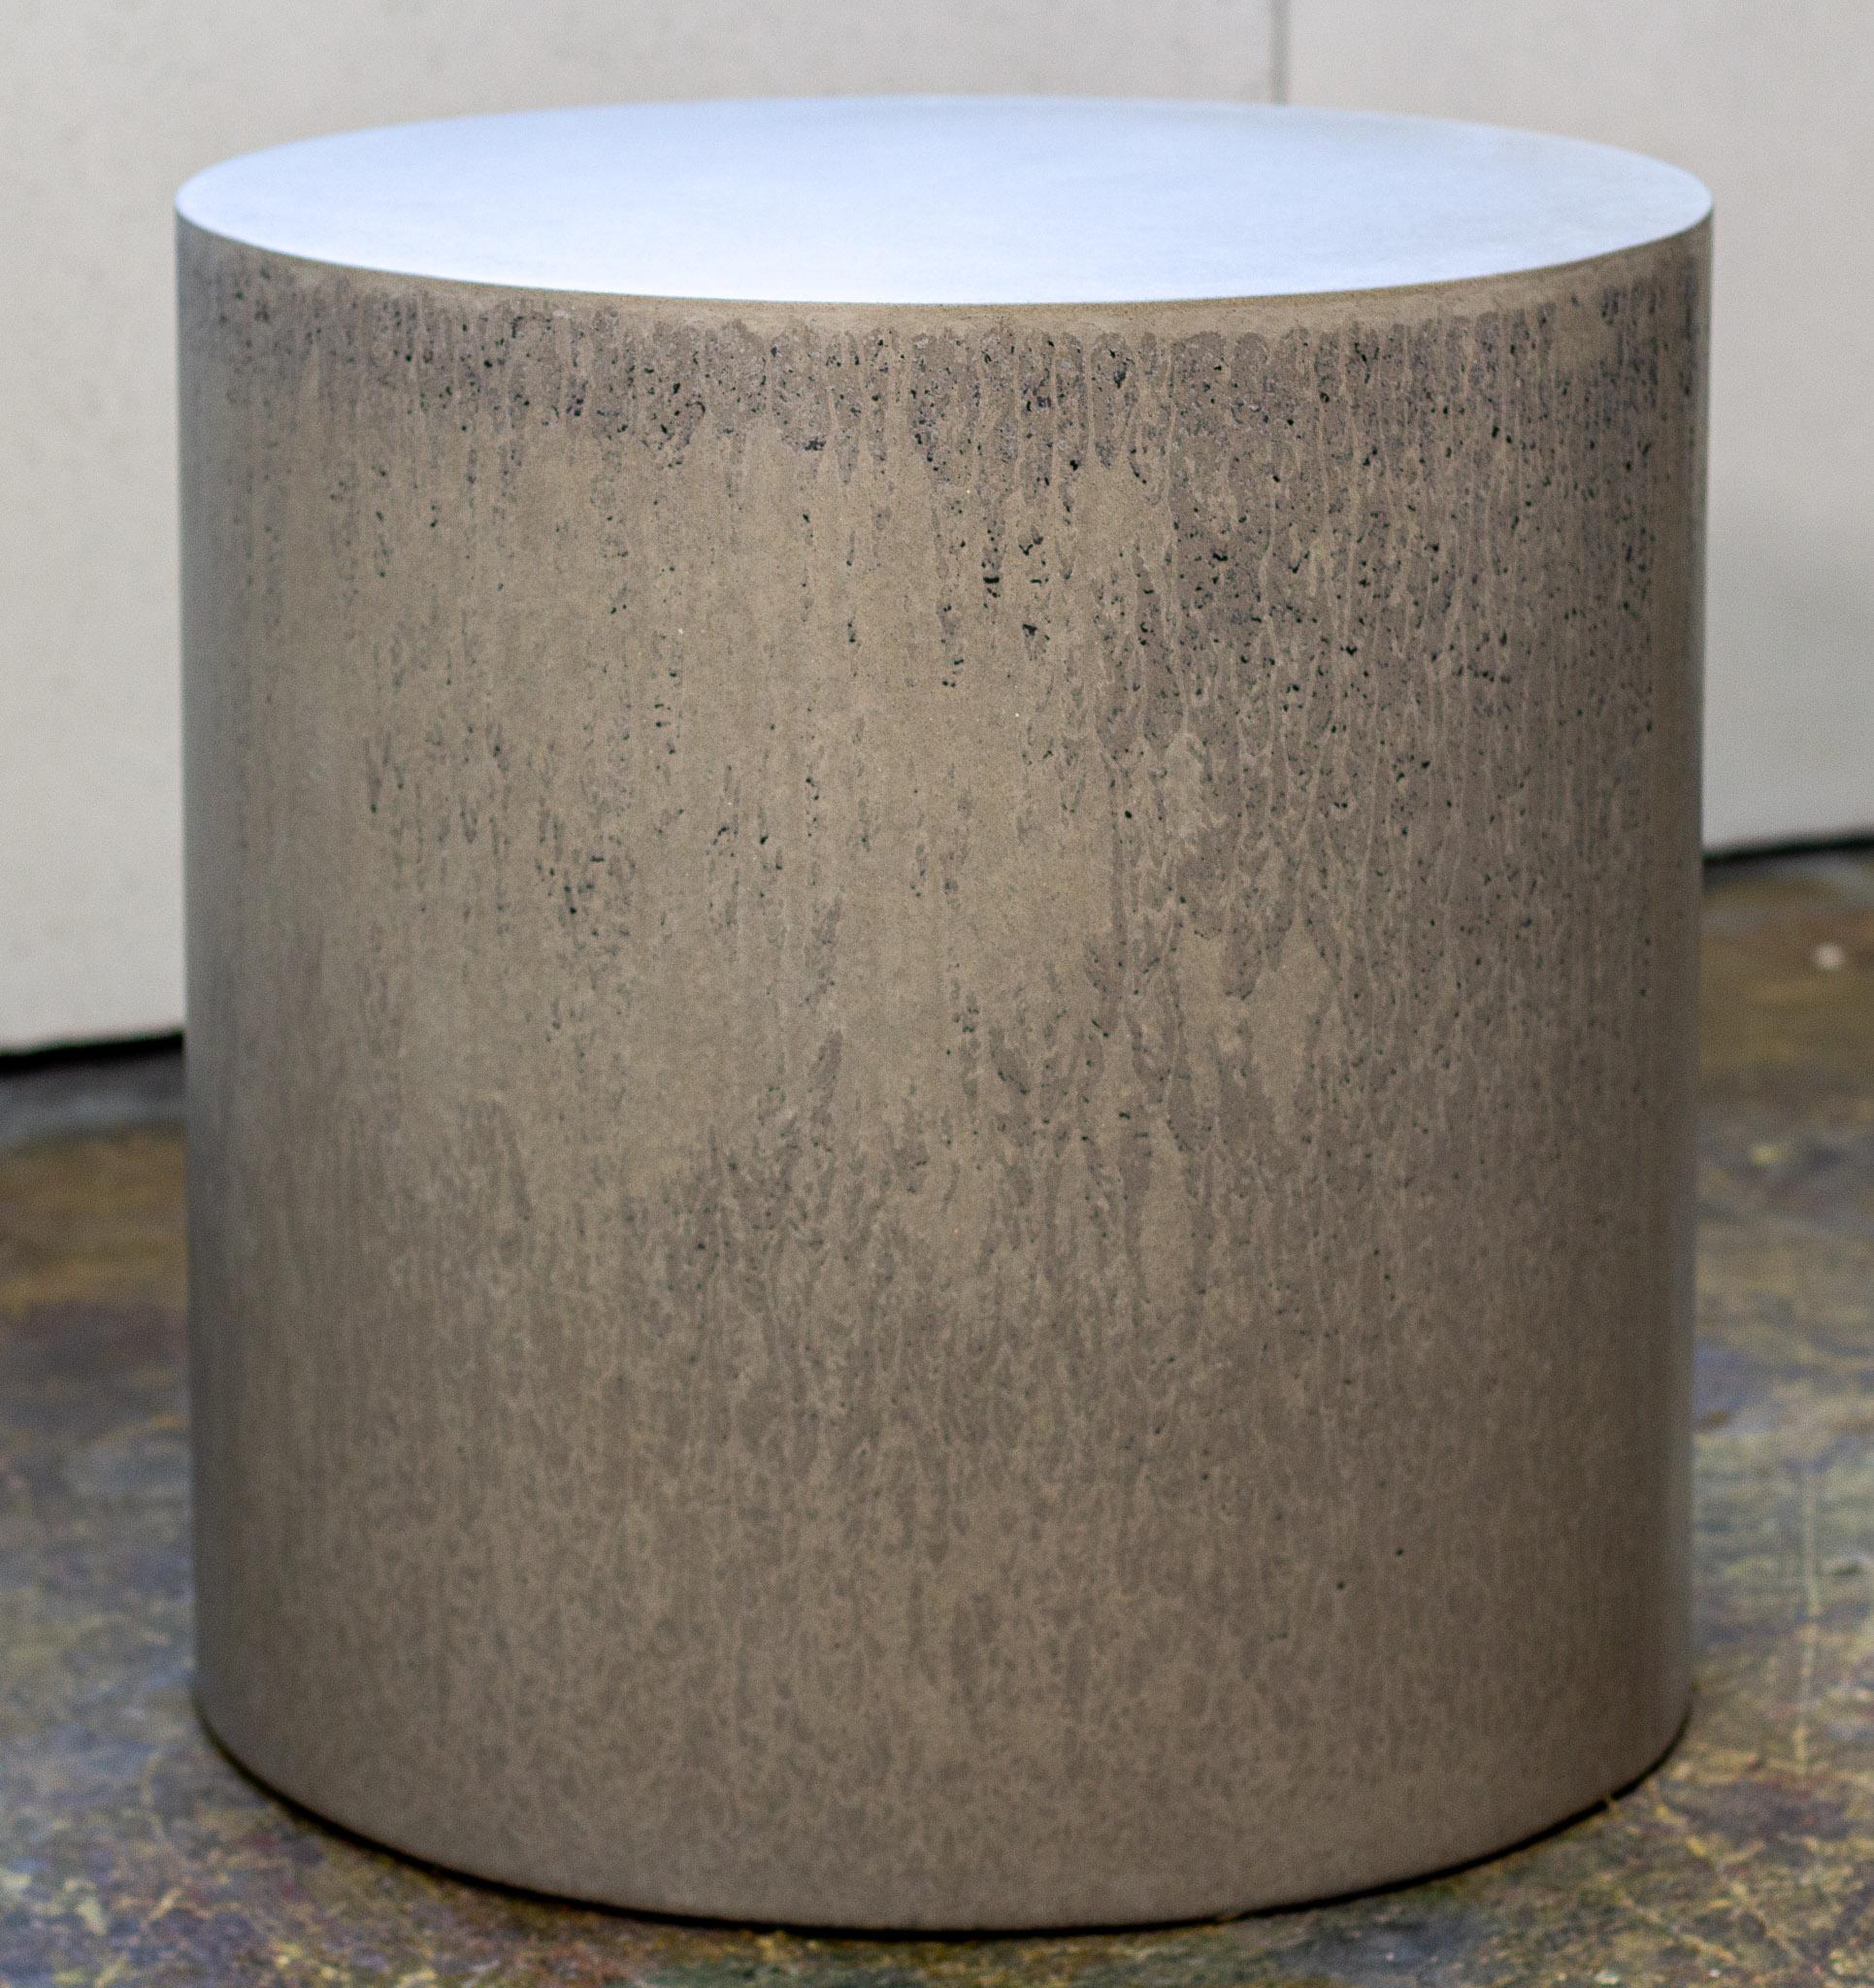 Flowing shades of grey with pops of black is the theme. Drippy grays organically flowing give character and depth to this silky smooth concrete cylinder. Hand crafted with the finest raw materials to last generations. Topped of with our ultra high